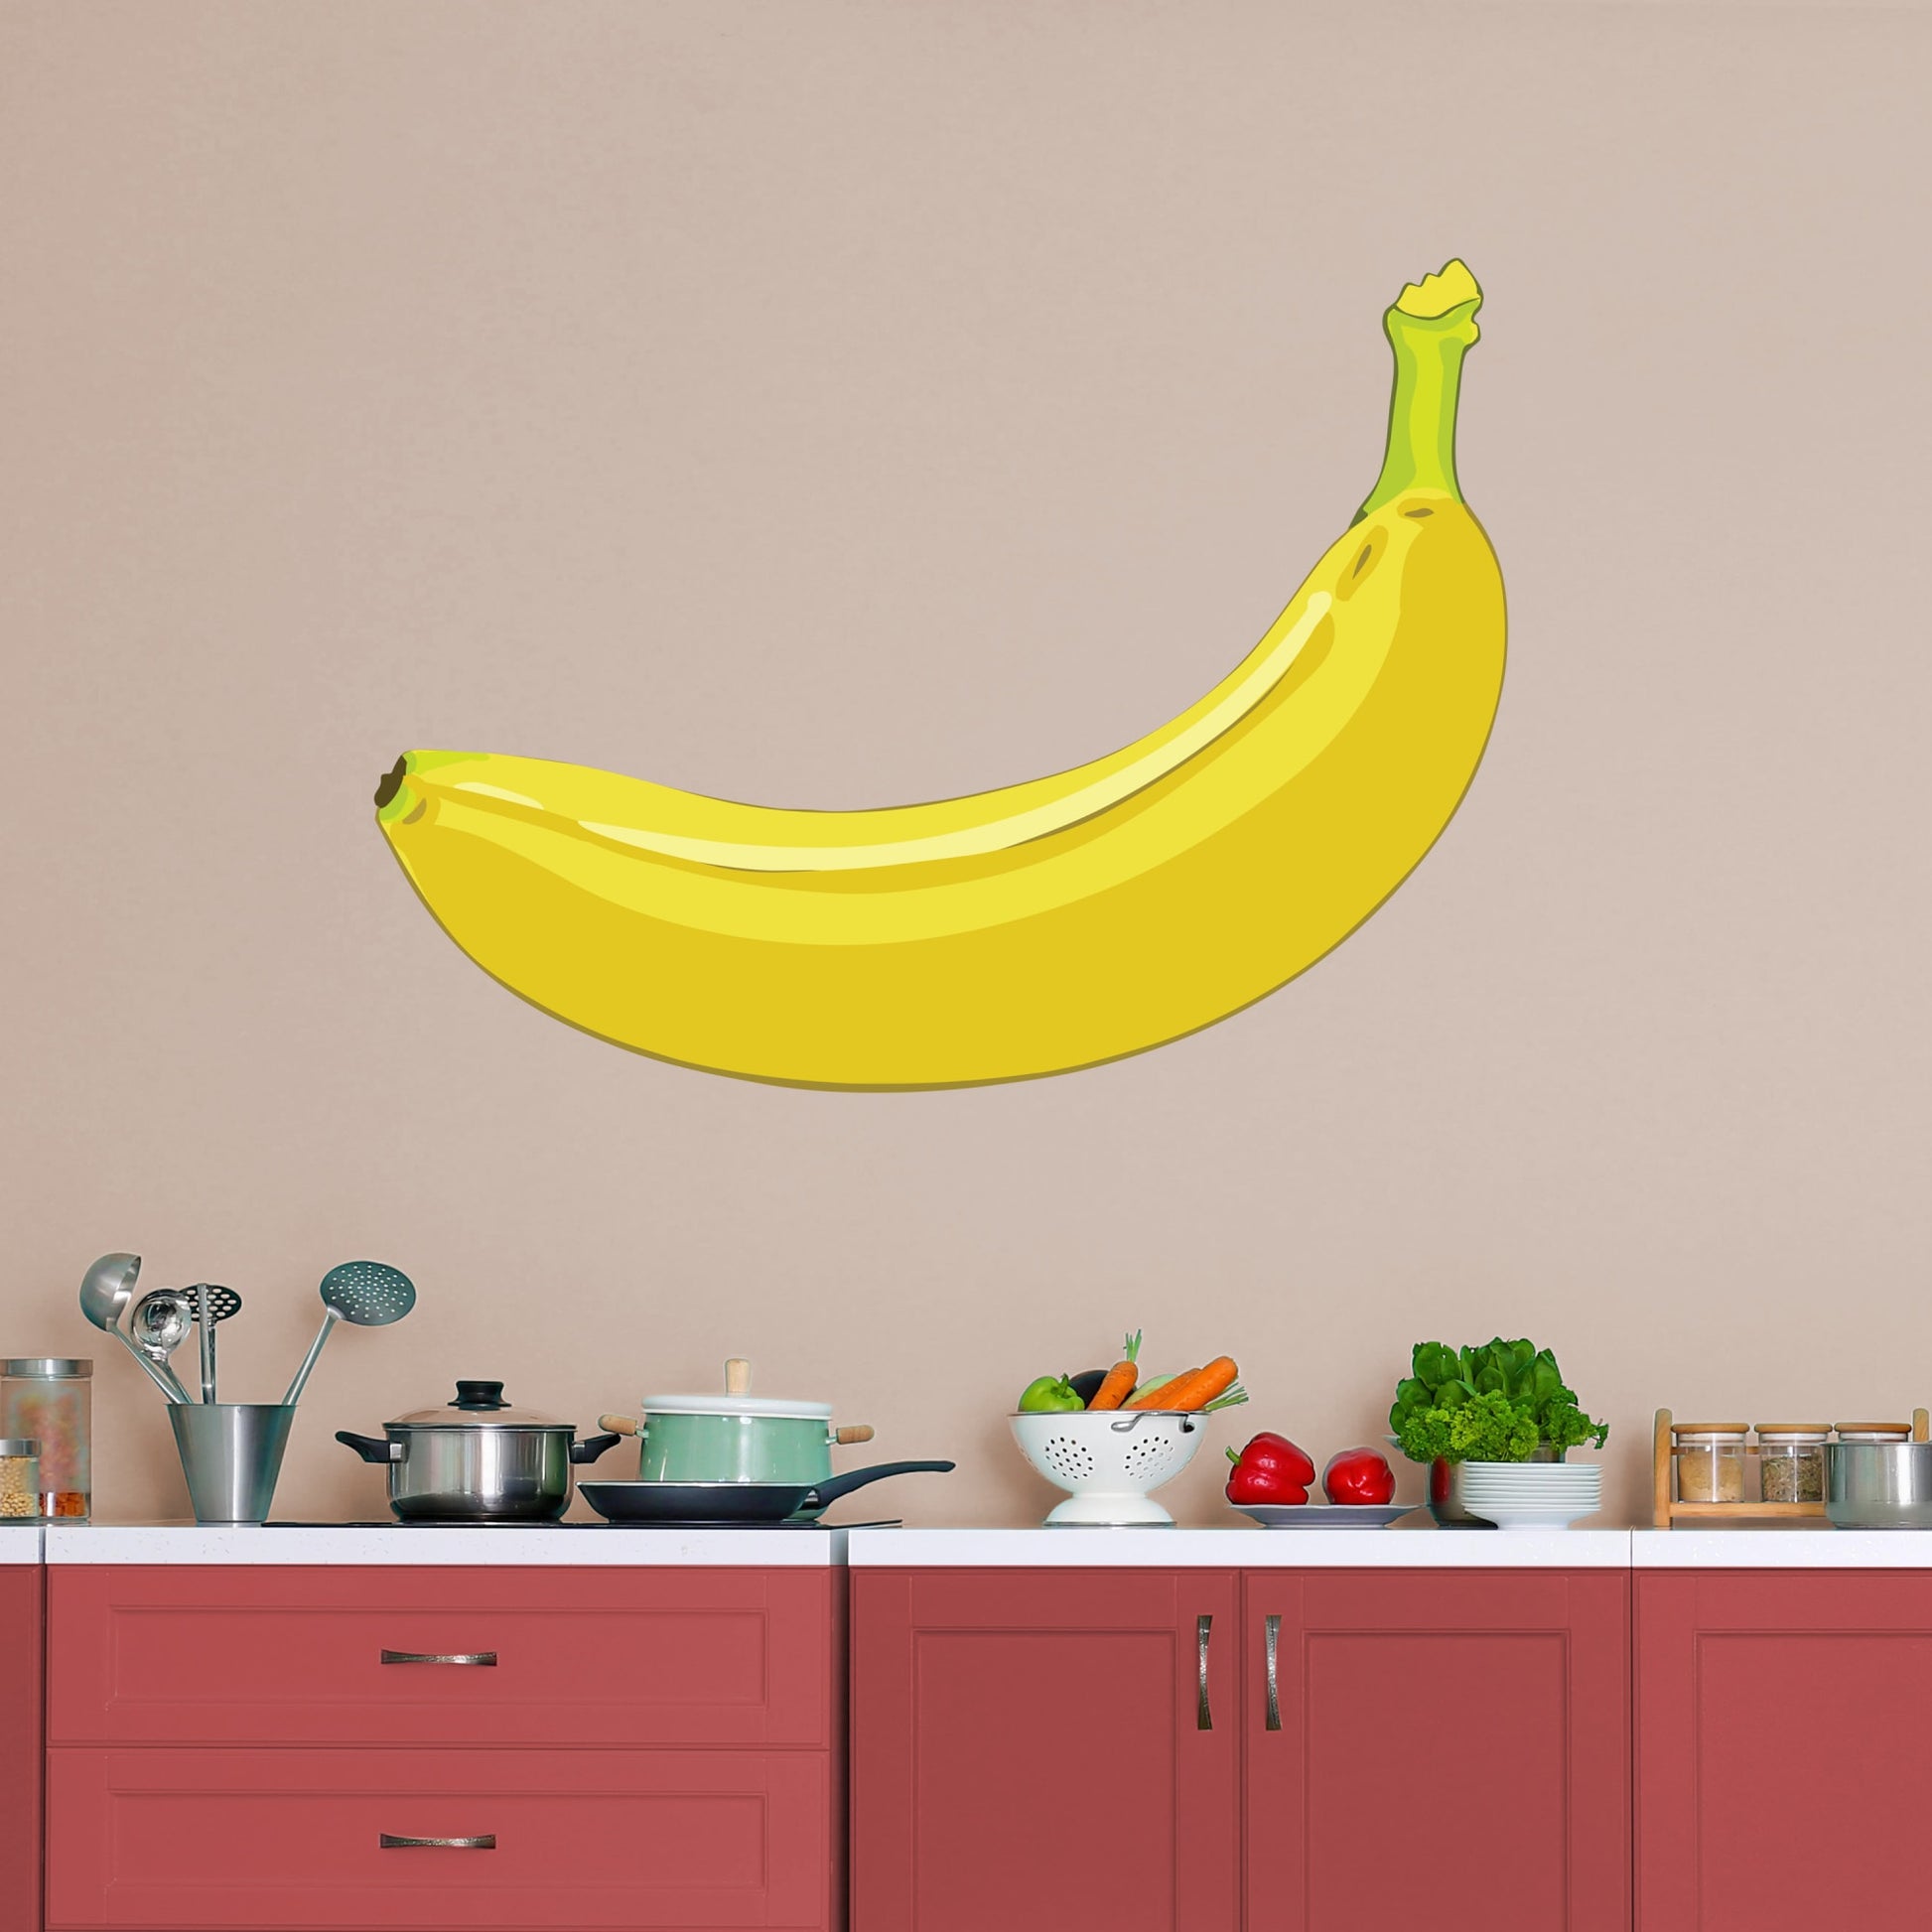 X-Large Banana + 2 Decals (30"W x 22"H)